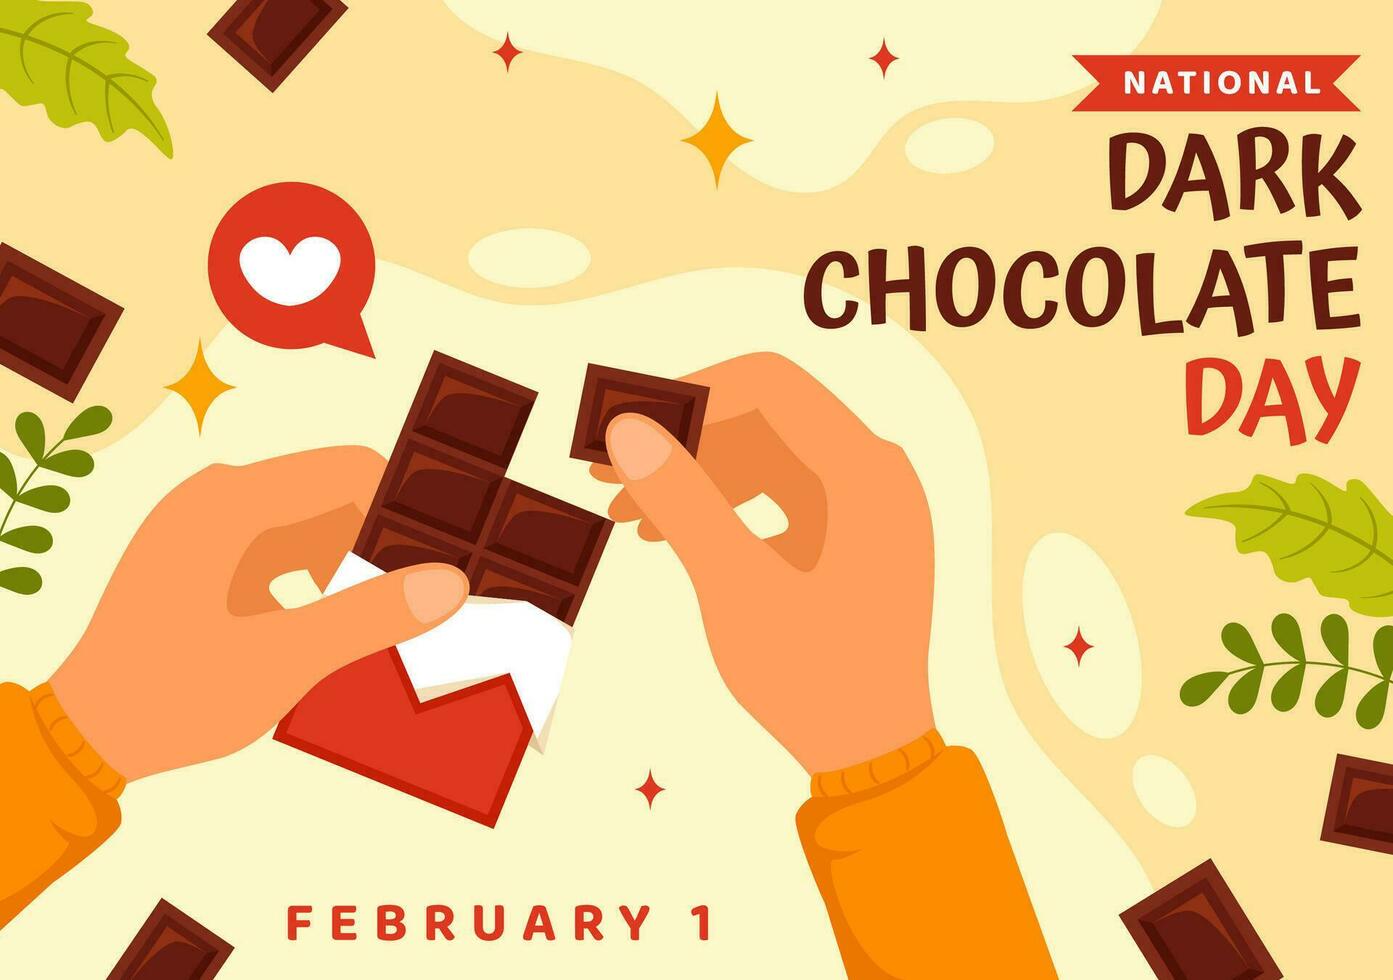 National Dark Chocolate Day Vector Illustration On February 1st for the Health and Happiness That Choco Brings in Flat Cartoon Background Design